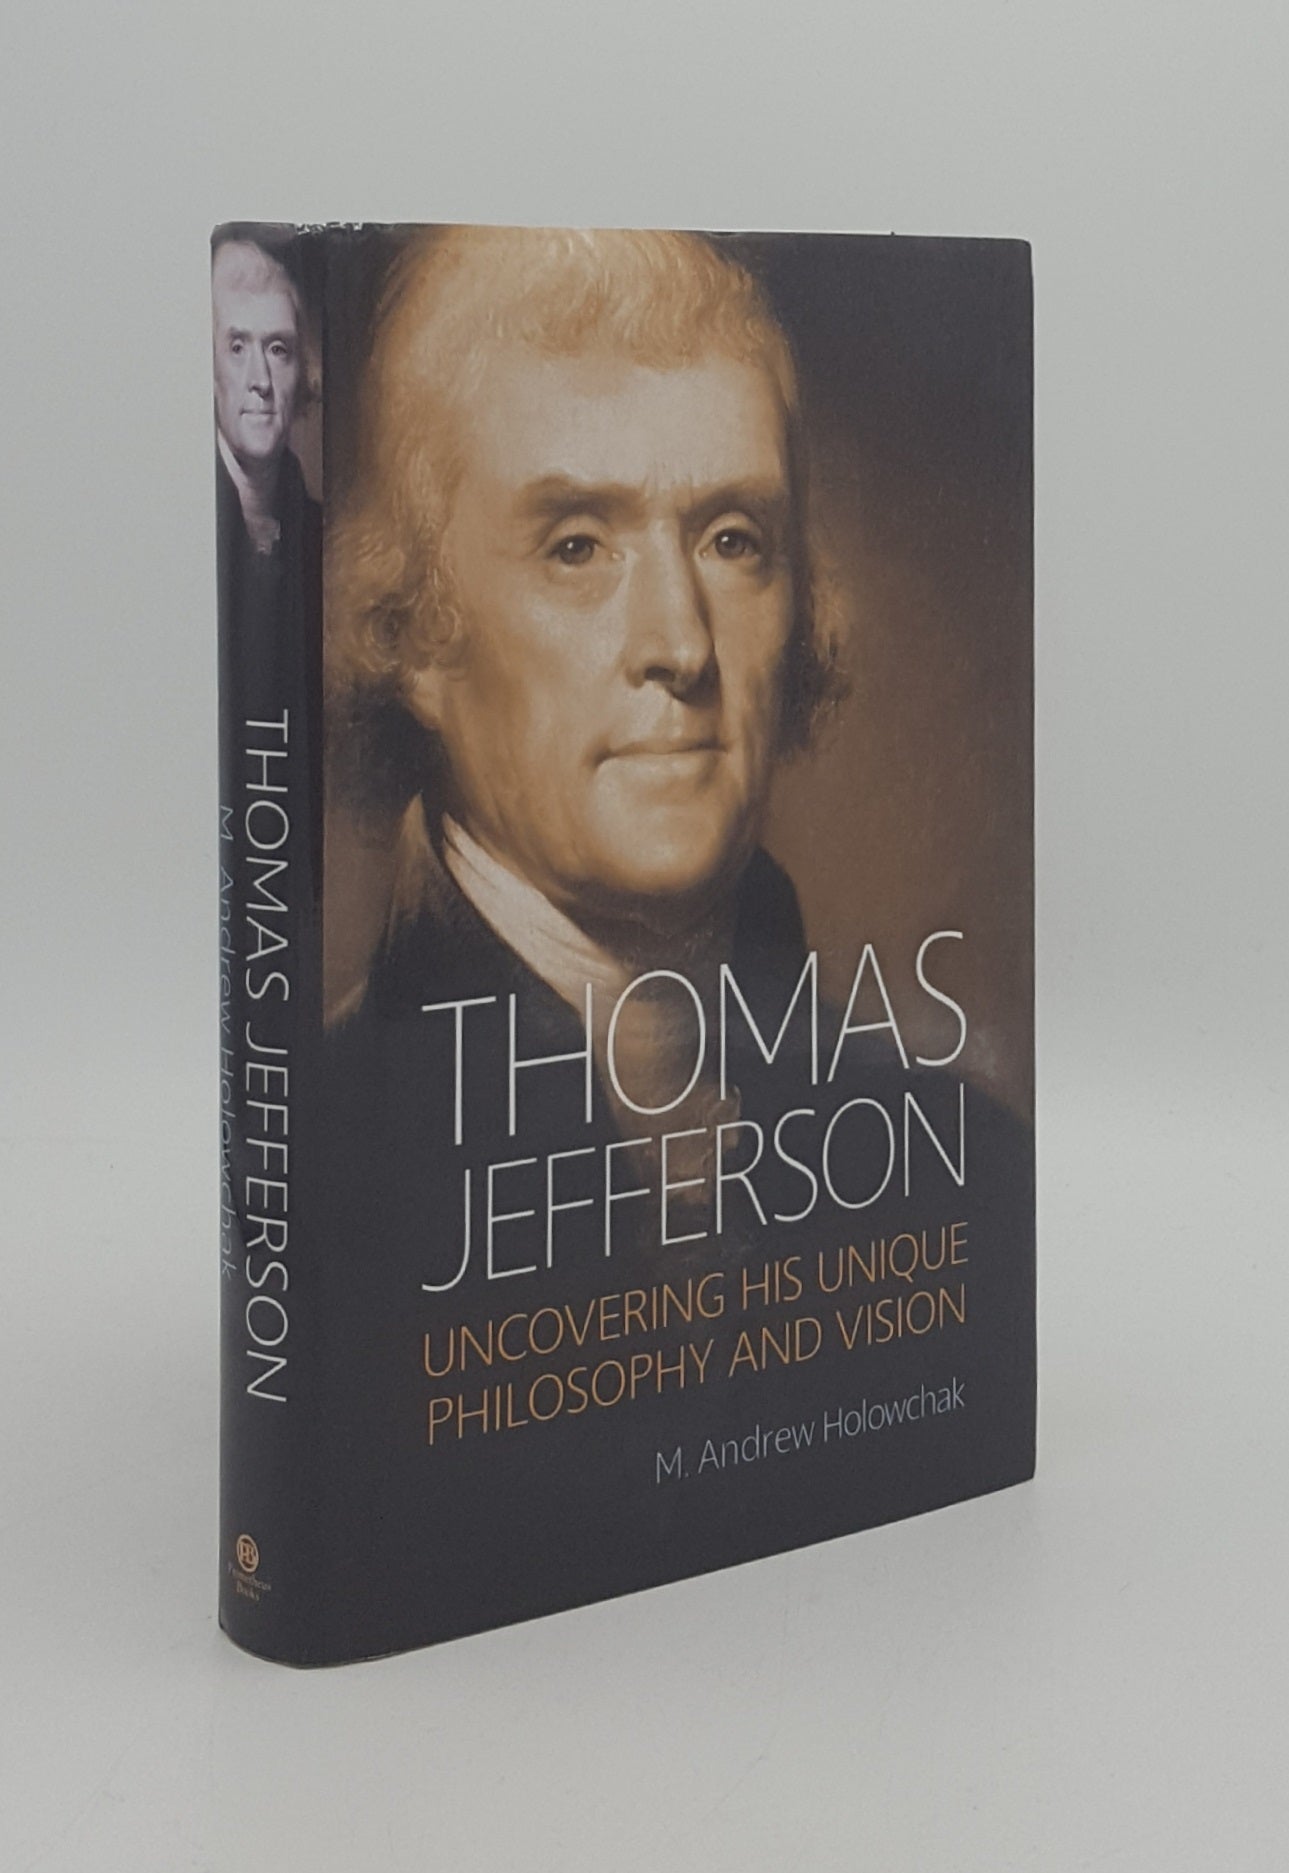 HOLOWCHAK M. Andrew - Thomas Jefferson Uncovering His Unique Philosophy and Vision